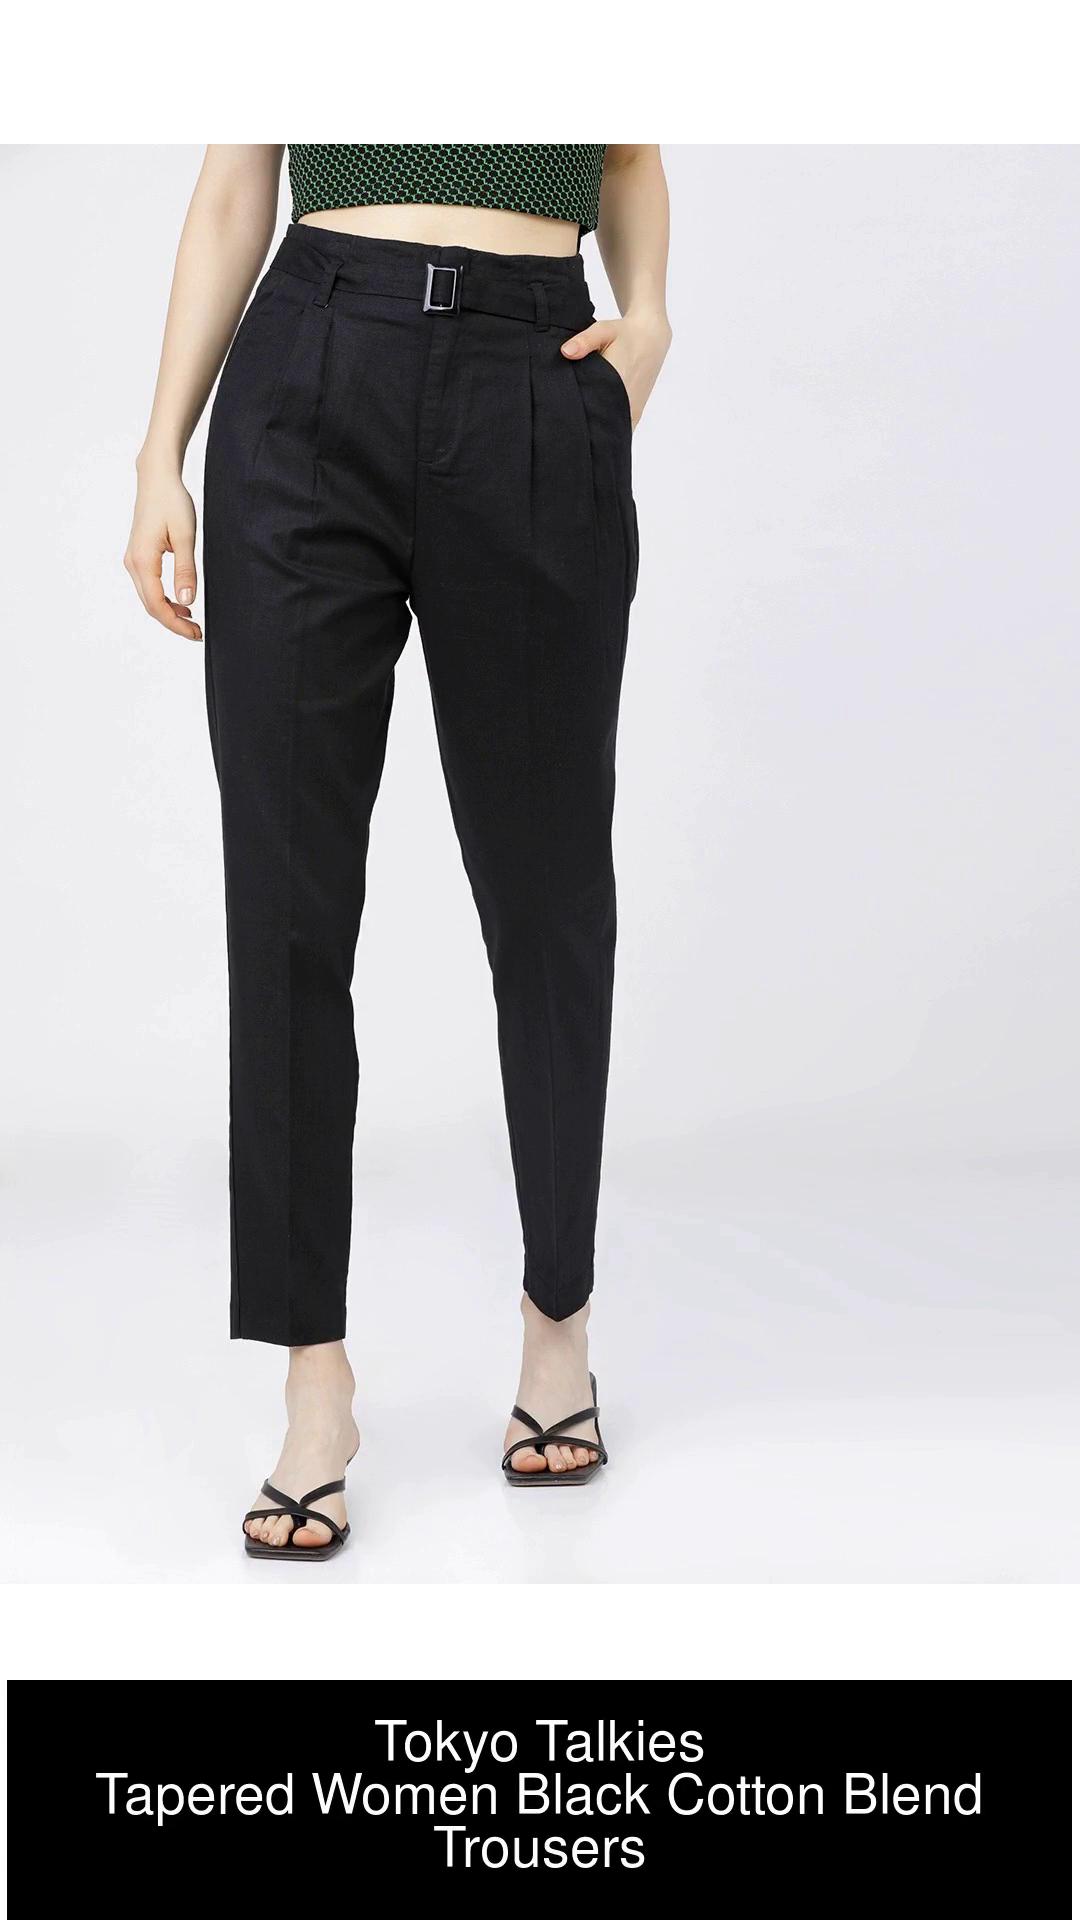 ASOS DESIGN Hourglass tailored smart tapered trousers in black  ASOS